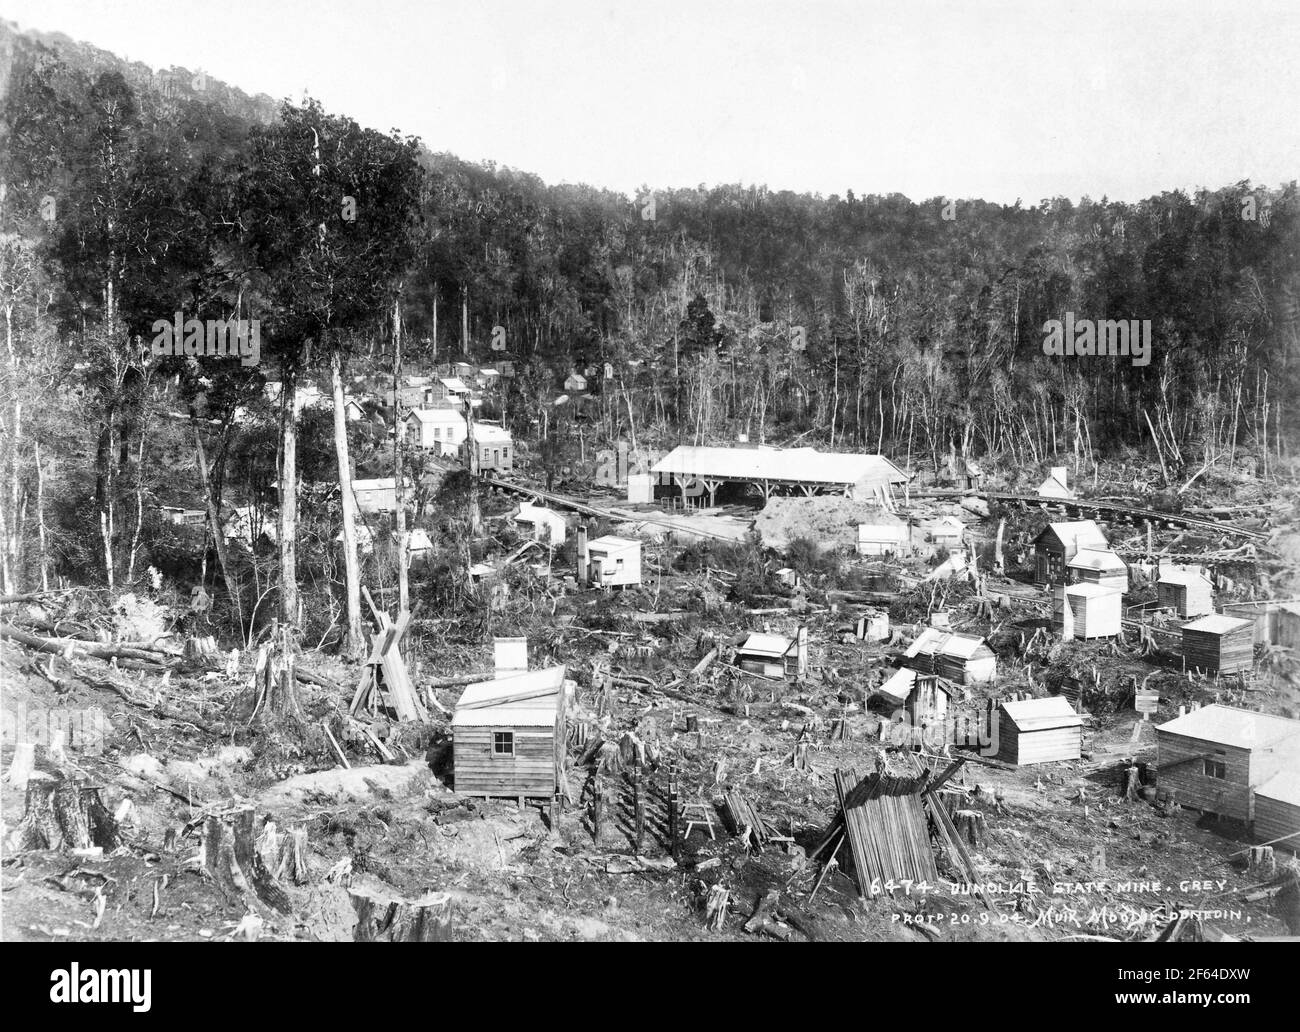 Buildings and infrastructure at Dunollie coal mine, New Zealand, circa 1910. Photo by Muir Moodie of Dunedin Stock Photo